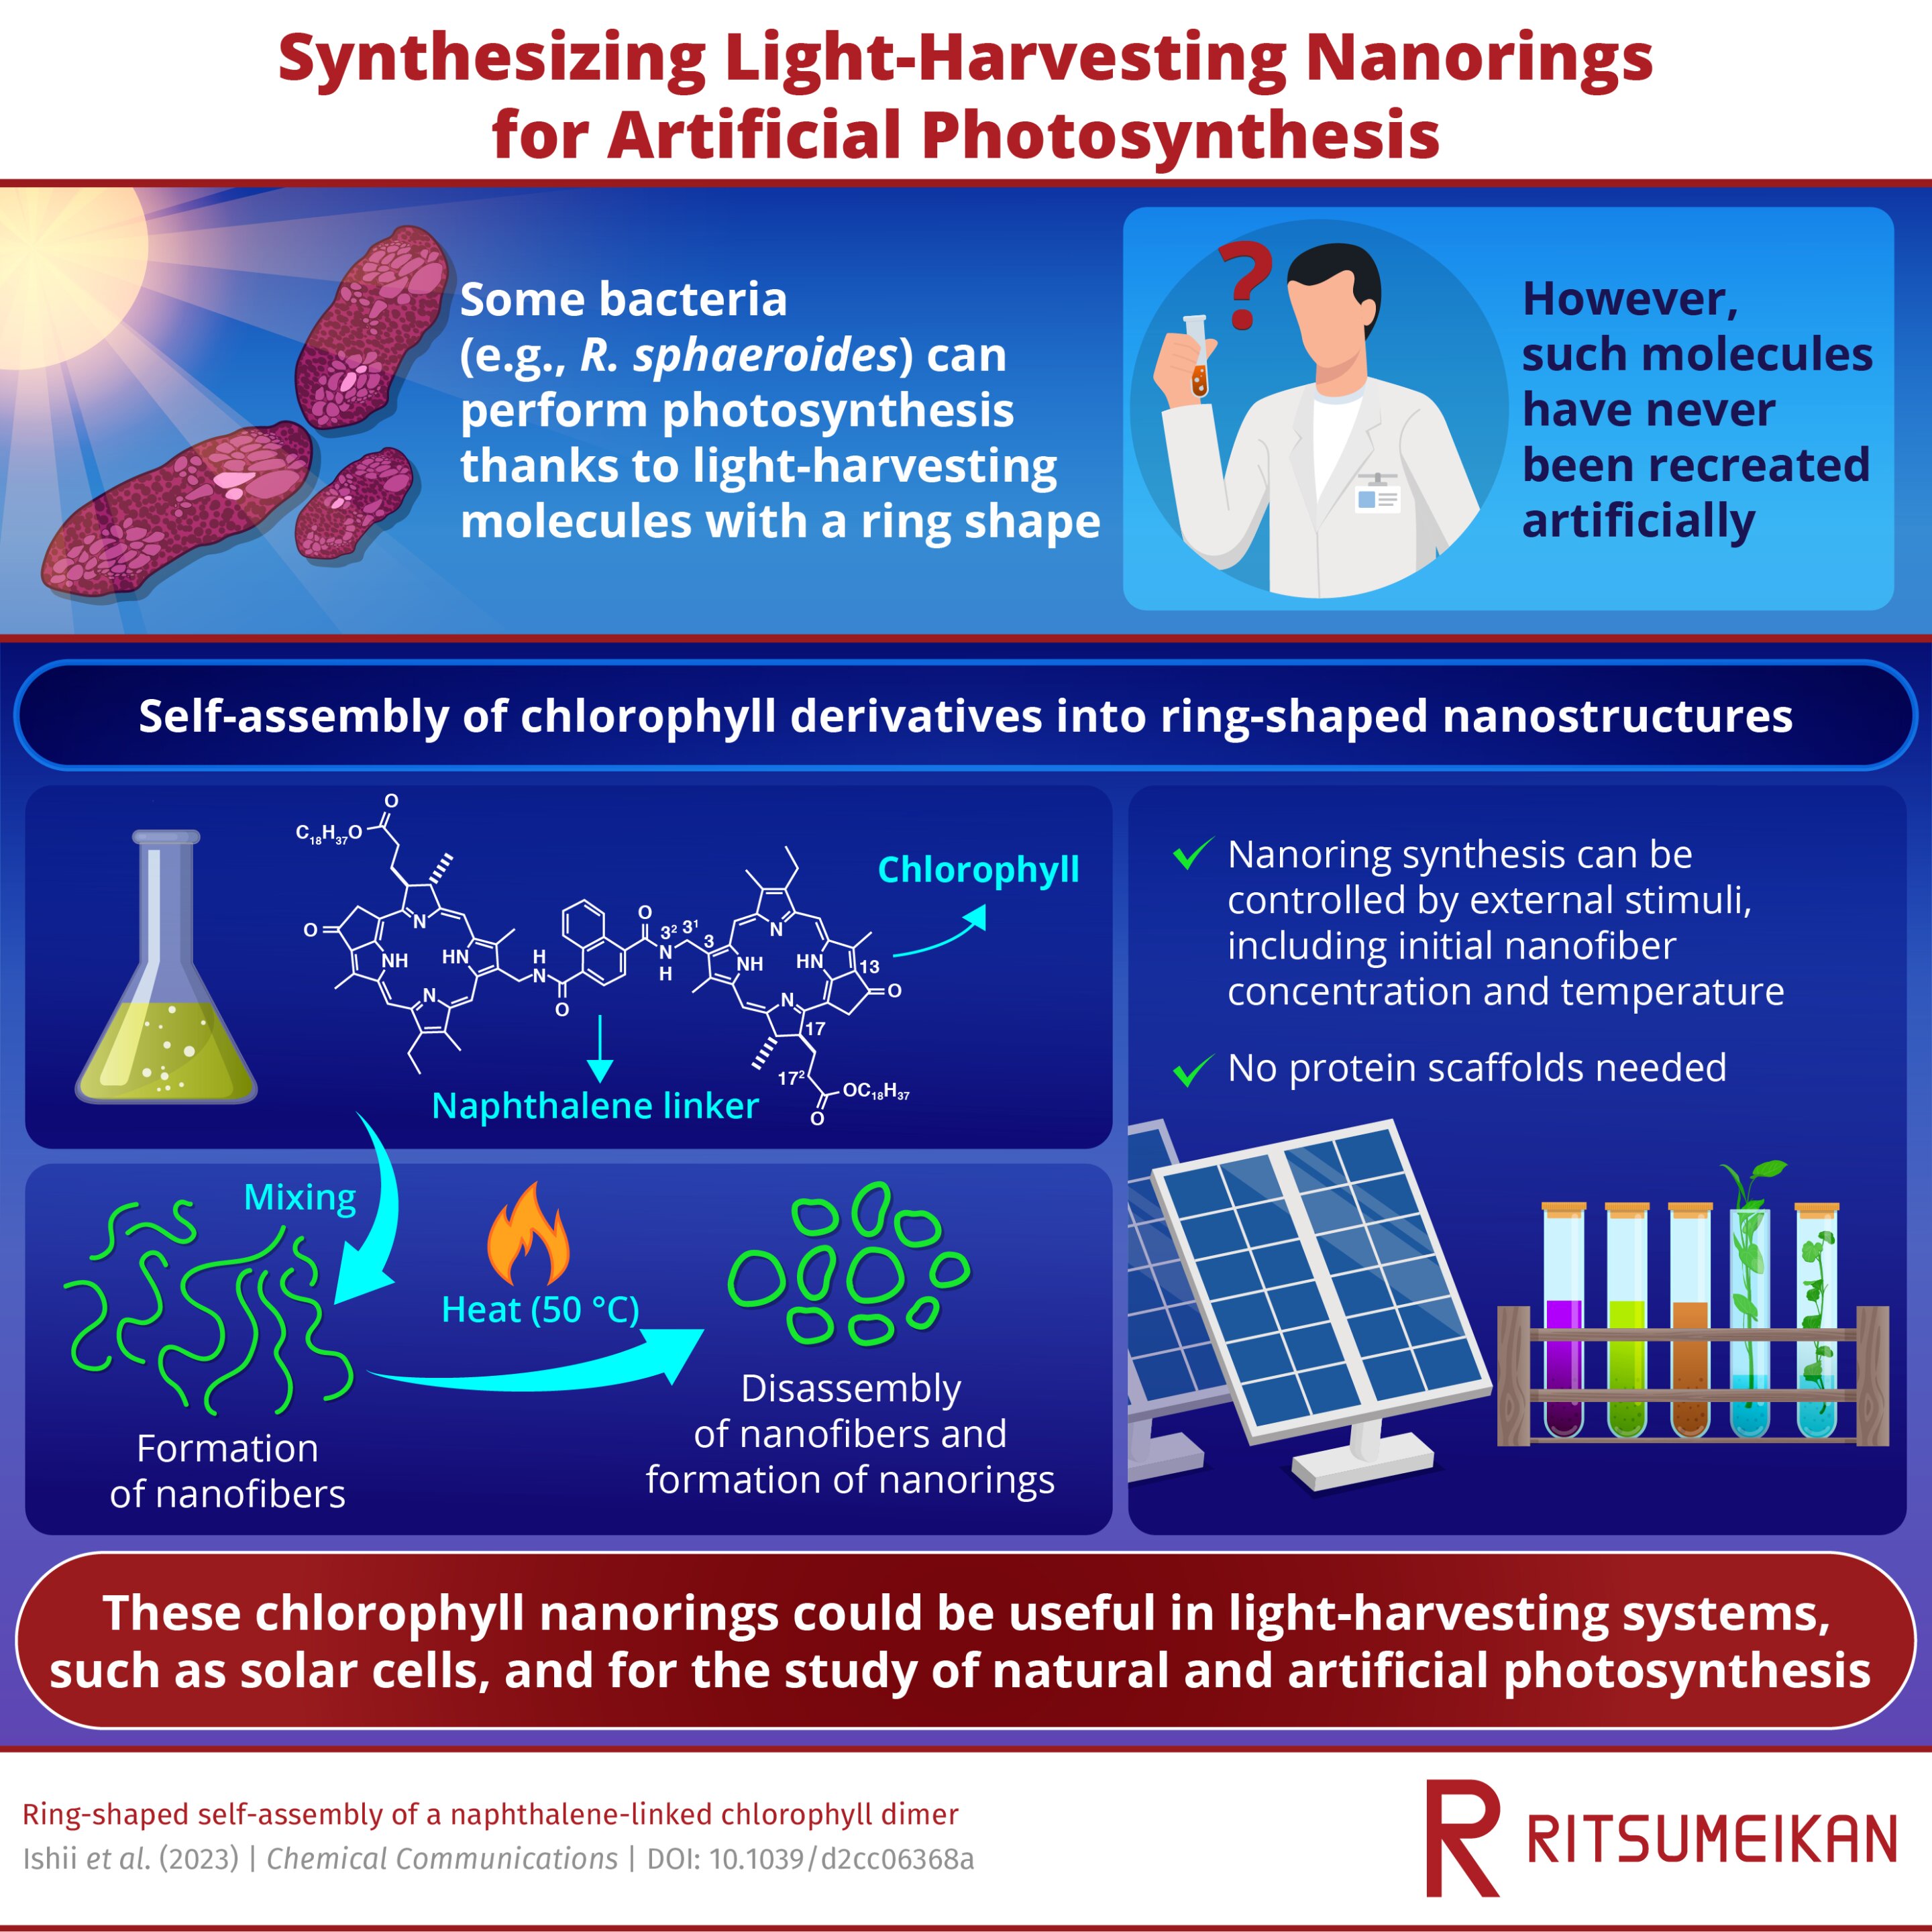 #Recreating the natural light-harvesting nanorings in photosynthetic bacteria